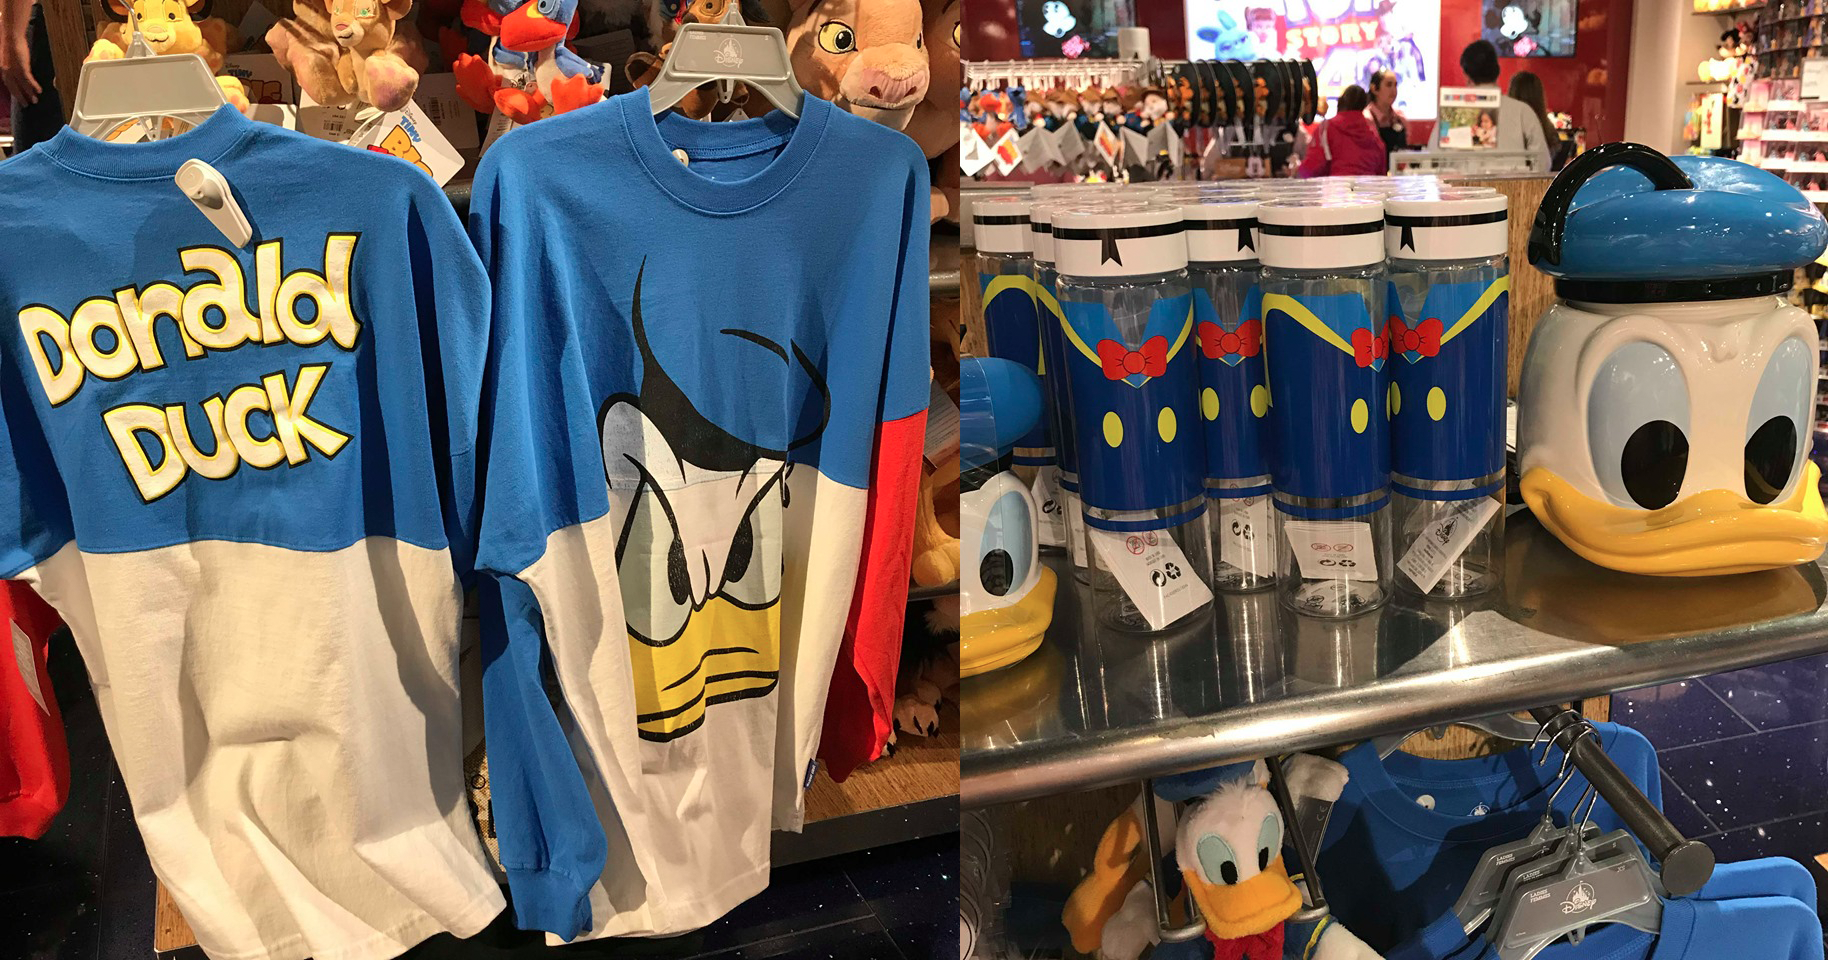 New Donald Duck Merchandise And Event Celebrates 85 Years